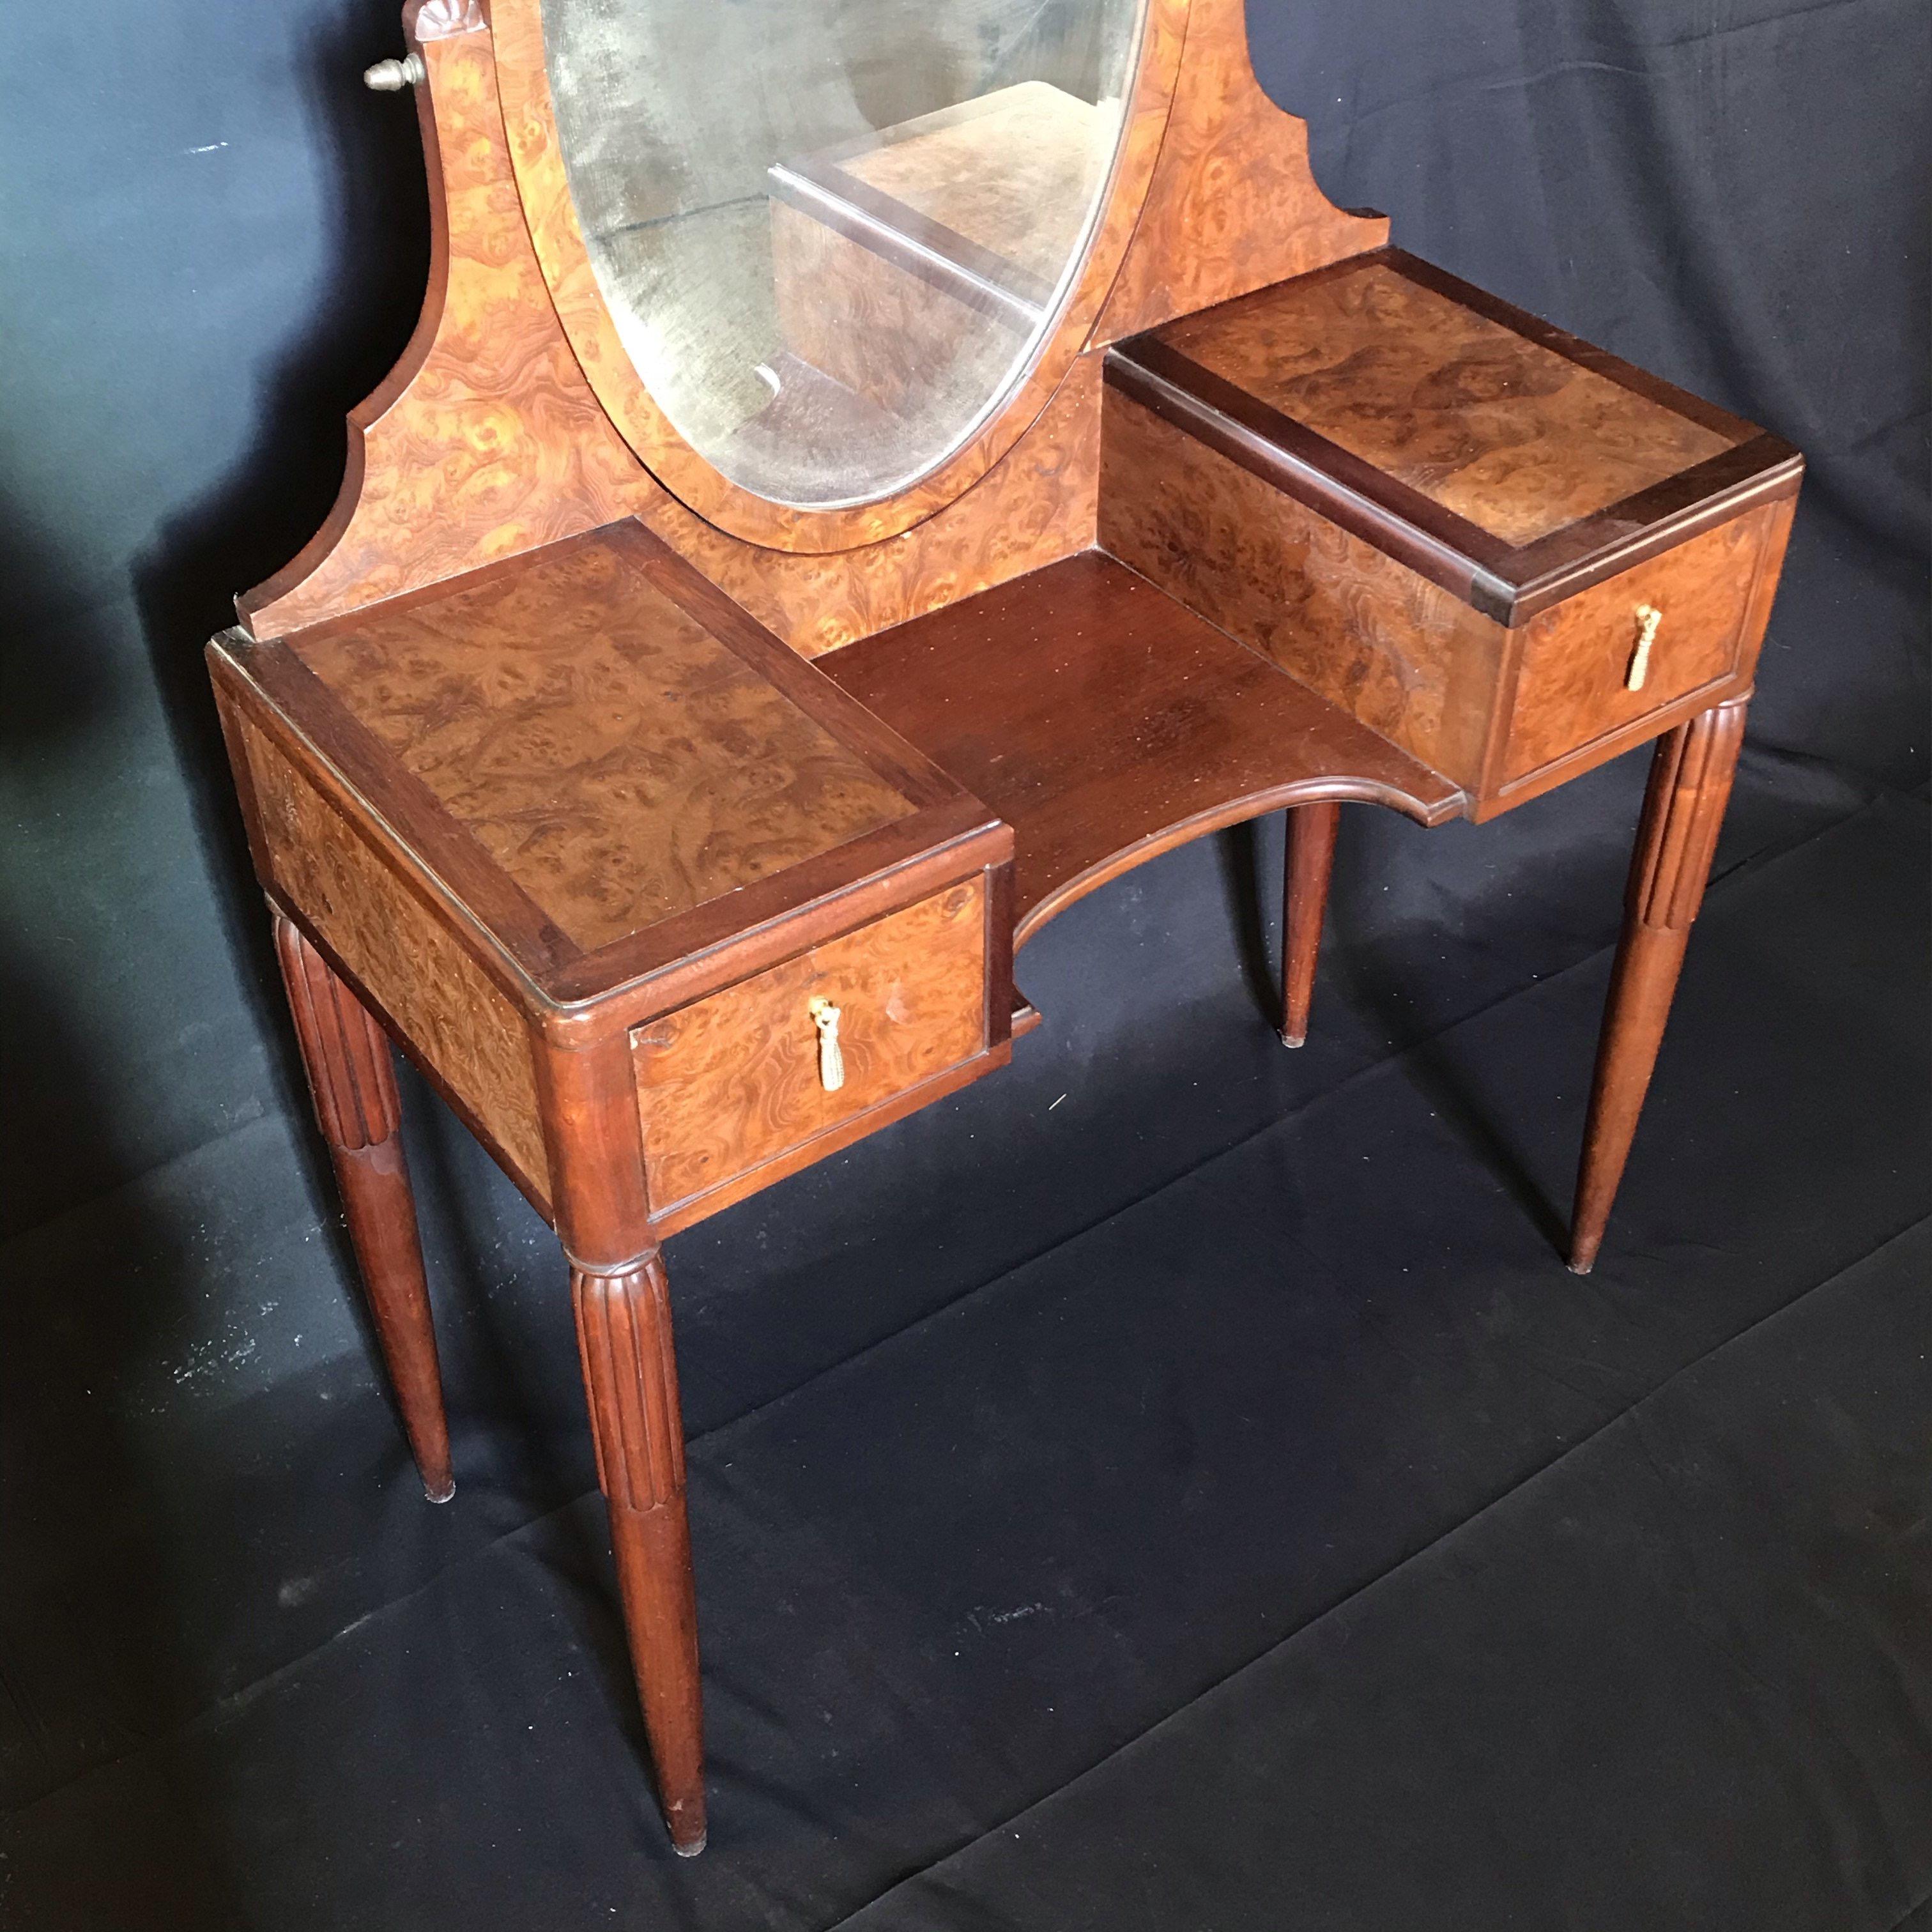 French burled walnut dressing table with beveled mirror - in great shape! Beautifully turned reeded legs and marquetry detail.
Measures: H desk top 28.25”
H skirt 22”
#4951.